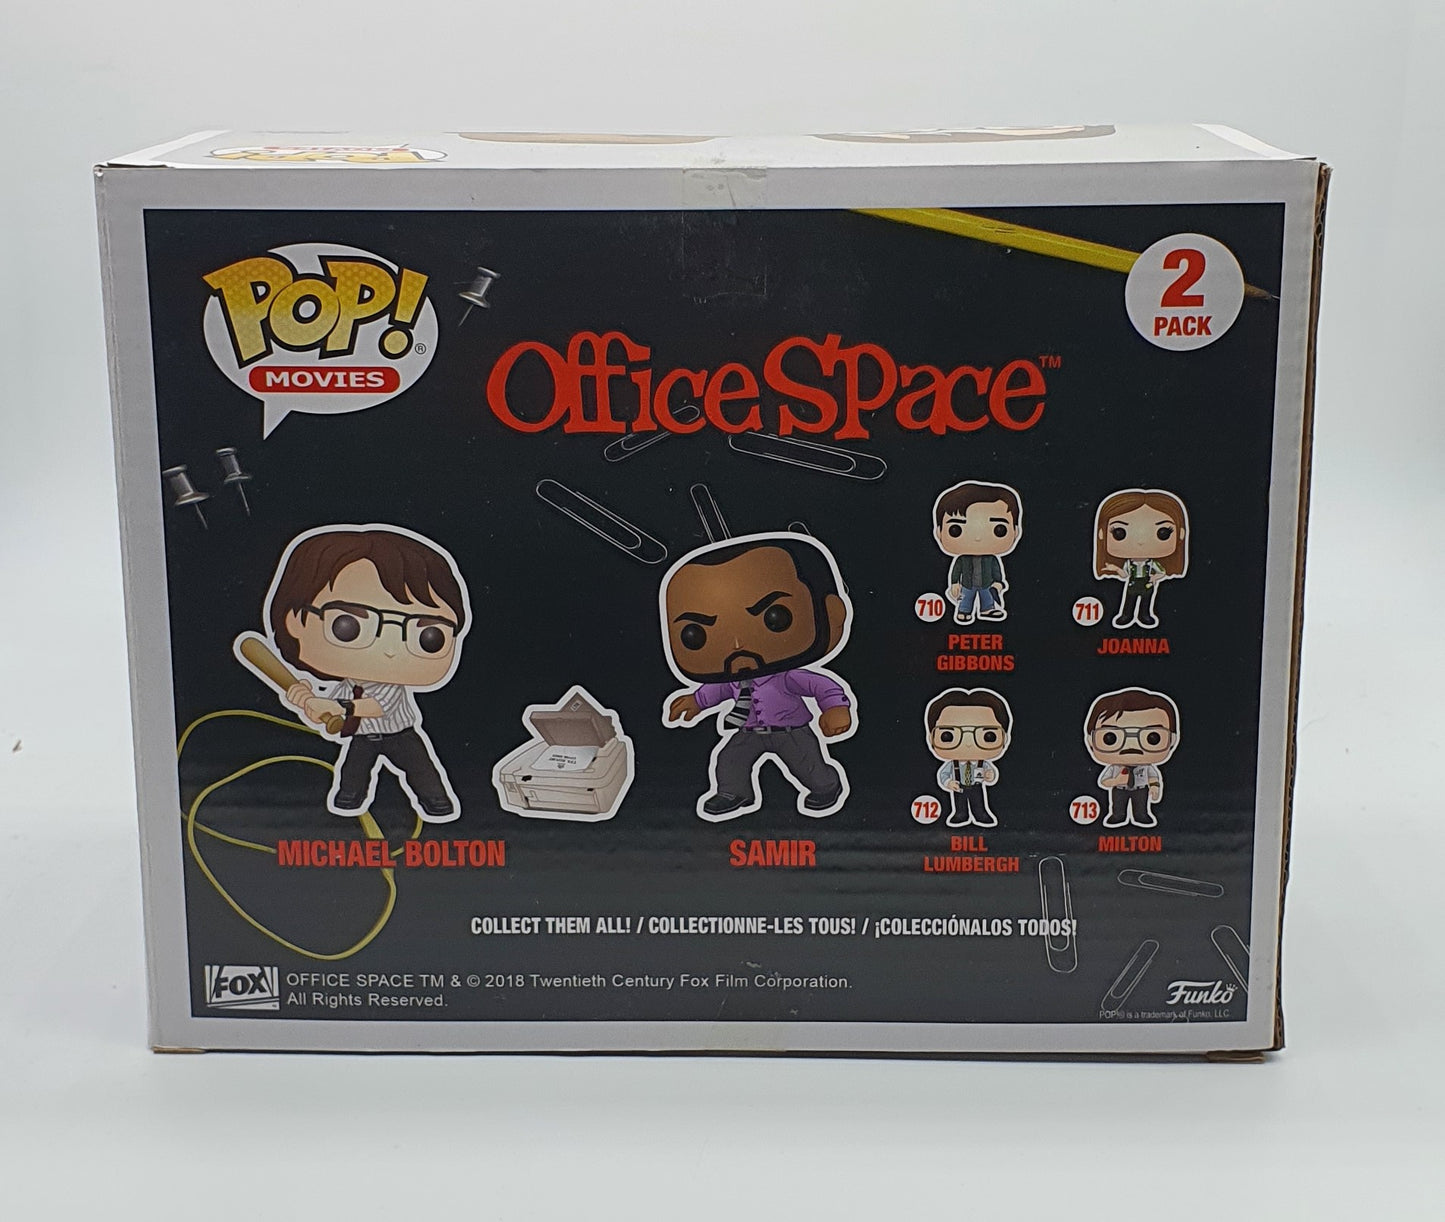 2 PACK - MOVIES - OFFICE SPACE - MICHAEL BOULTON AND SAMIR